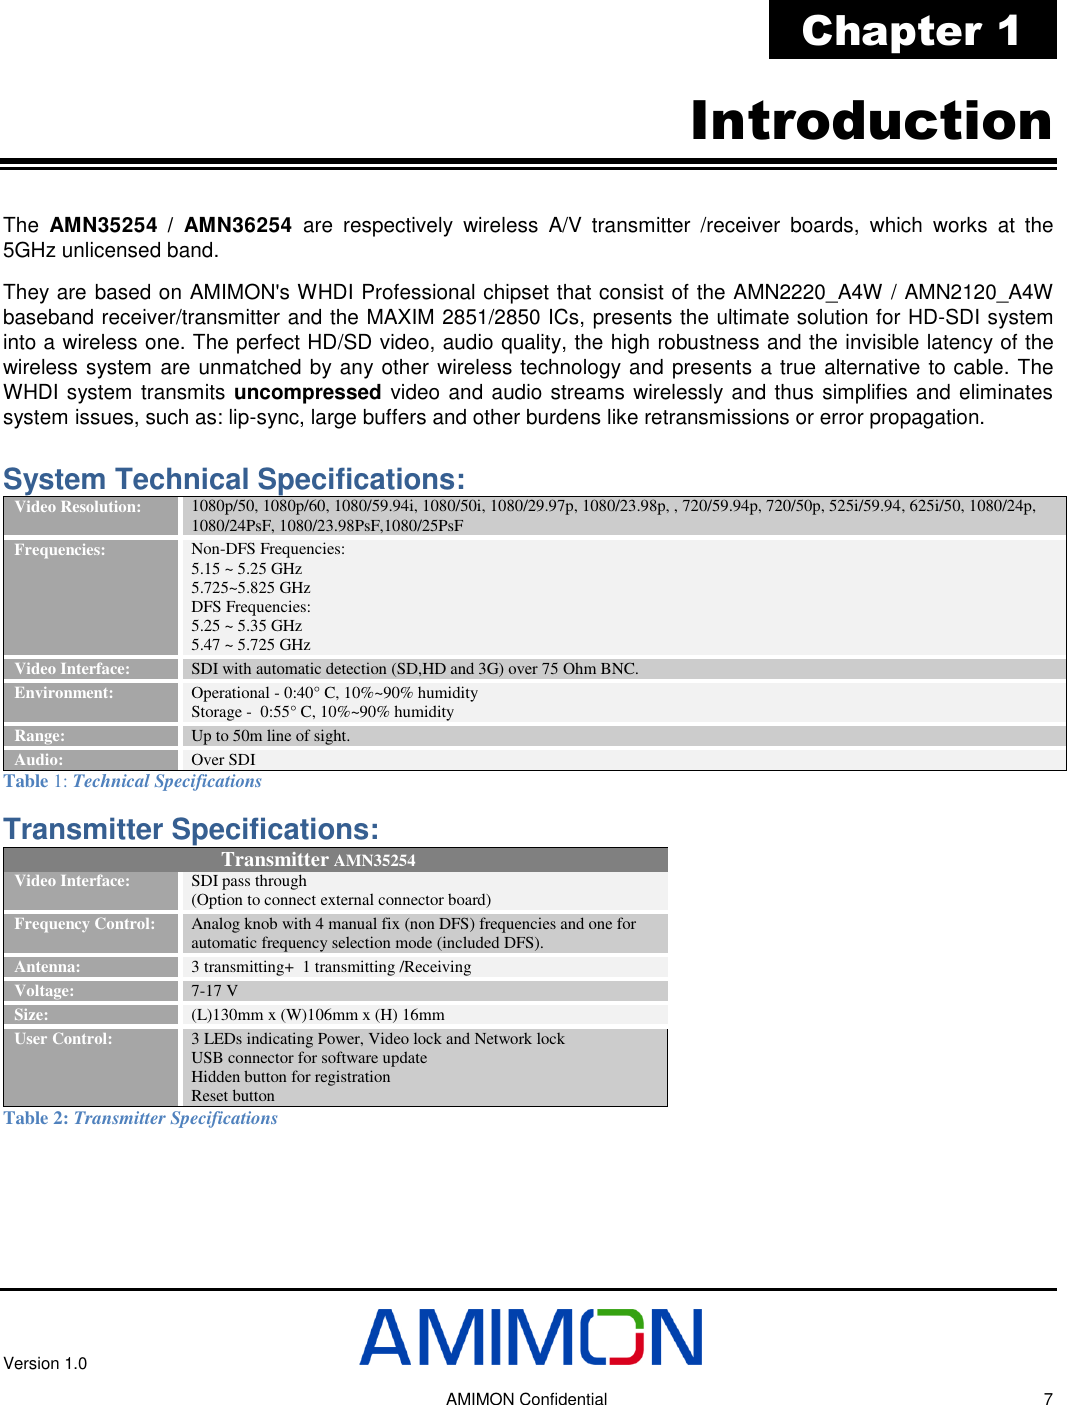 Version 1.0     AMIMON Confidential    7 Chapter 1 Introduction The  AMN35254 / AMN36254  are  respectively  wireless  A/V  transmitter  /receiver  boards,  which  works  at  the 5GHz unlicensed band. They are based on AMIMON&apos;s WHDI Professional chipset that consist of the AMN2220_A4W / AMN2120_A4W baseband receiver/transmitter and the MAXIM 2851/2850 ICs, presents the ultimate solution for HD-SDI system into a wireless one. The perfect HD/SD video, audio quality, the high robustness and the invisible latency of the wireless system are unmatched by any other wireless technology and presents a true alternative to cable. The WHDI system transmits uncompressed video and audio streams wirelessly and thus simplifies and eliminates system issues, such as: lip-sync, large buffers and other burdens like retransmissions or error propagation.  System Technical Specifications: Video Resolution: 1080p/50, 1080p/60, 1080/59.94i, 1080/50i, 1080/29.97p, 1080/23.98p, , 720/59.94p, 720/50p, 525i/59.94, 625i/50, 1080/24p, 1080/24PsF, 1080/23.98PsF,1080/25PsF  Frequencies: Non-DFS Frequencies: 5.15 ~ 5.25 GHz  5.725~5.825 GHz  DFS Frequencies: 5.25 ~ 5.35 GHz 5.47 ~ 5.725 GHz Video Interface: SDI with automatic detection (SD,HD and 3G) over 75 Ohm BNC.  Environment: Operational - 0:40° C, 10%~90% humidity Storage -  0:55° C, 10%~90% humidity Range: Up to 50m line of sight. Audio: Over SDI Table 1: Technical Specifications Transmitter Specifications:  Transmitter AMN35254 Video Interface:  SDI pass through (Option to connect external connector board) Frequency Control:  Analog knob with 4 manual fix (non DFS) frequencies and one for automatic frequency selection mode (included DFS). Antenna: 3 transmitting+  1 transmitting /Receiving  Voltage:  7-17 V Size:  (L)130mm x (W)106mm x (H) 16mm User Control: 3 LEDs indicating Power, Video lock and Network lock USB connector for software update  Hidden button for registration Reset button Table 2: Transmitter Specifications 